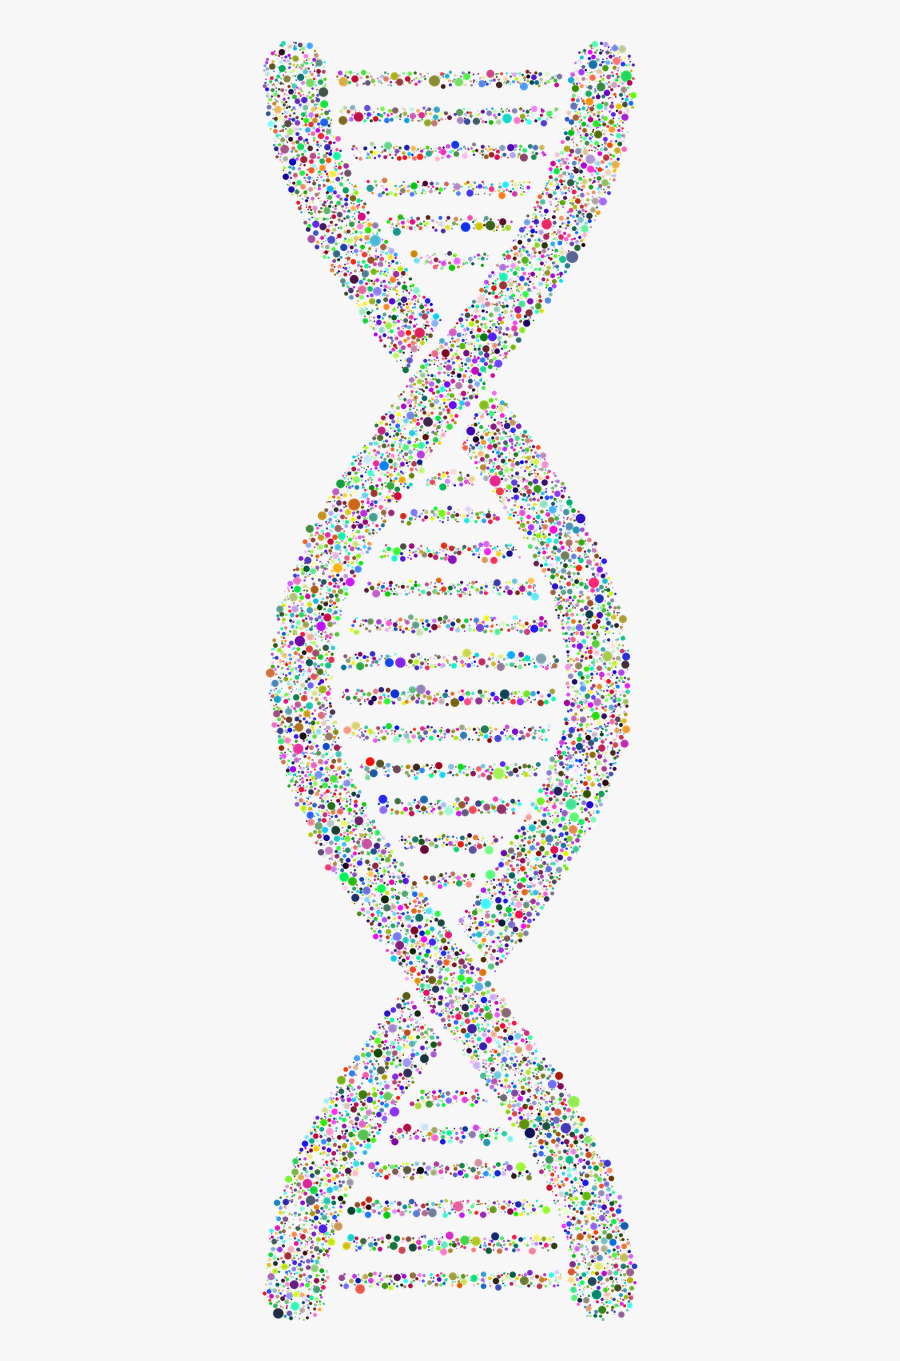 Dna Helix Circles Free Picture - Dna, Transparent Clipart